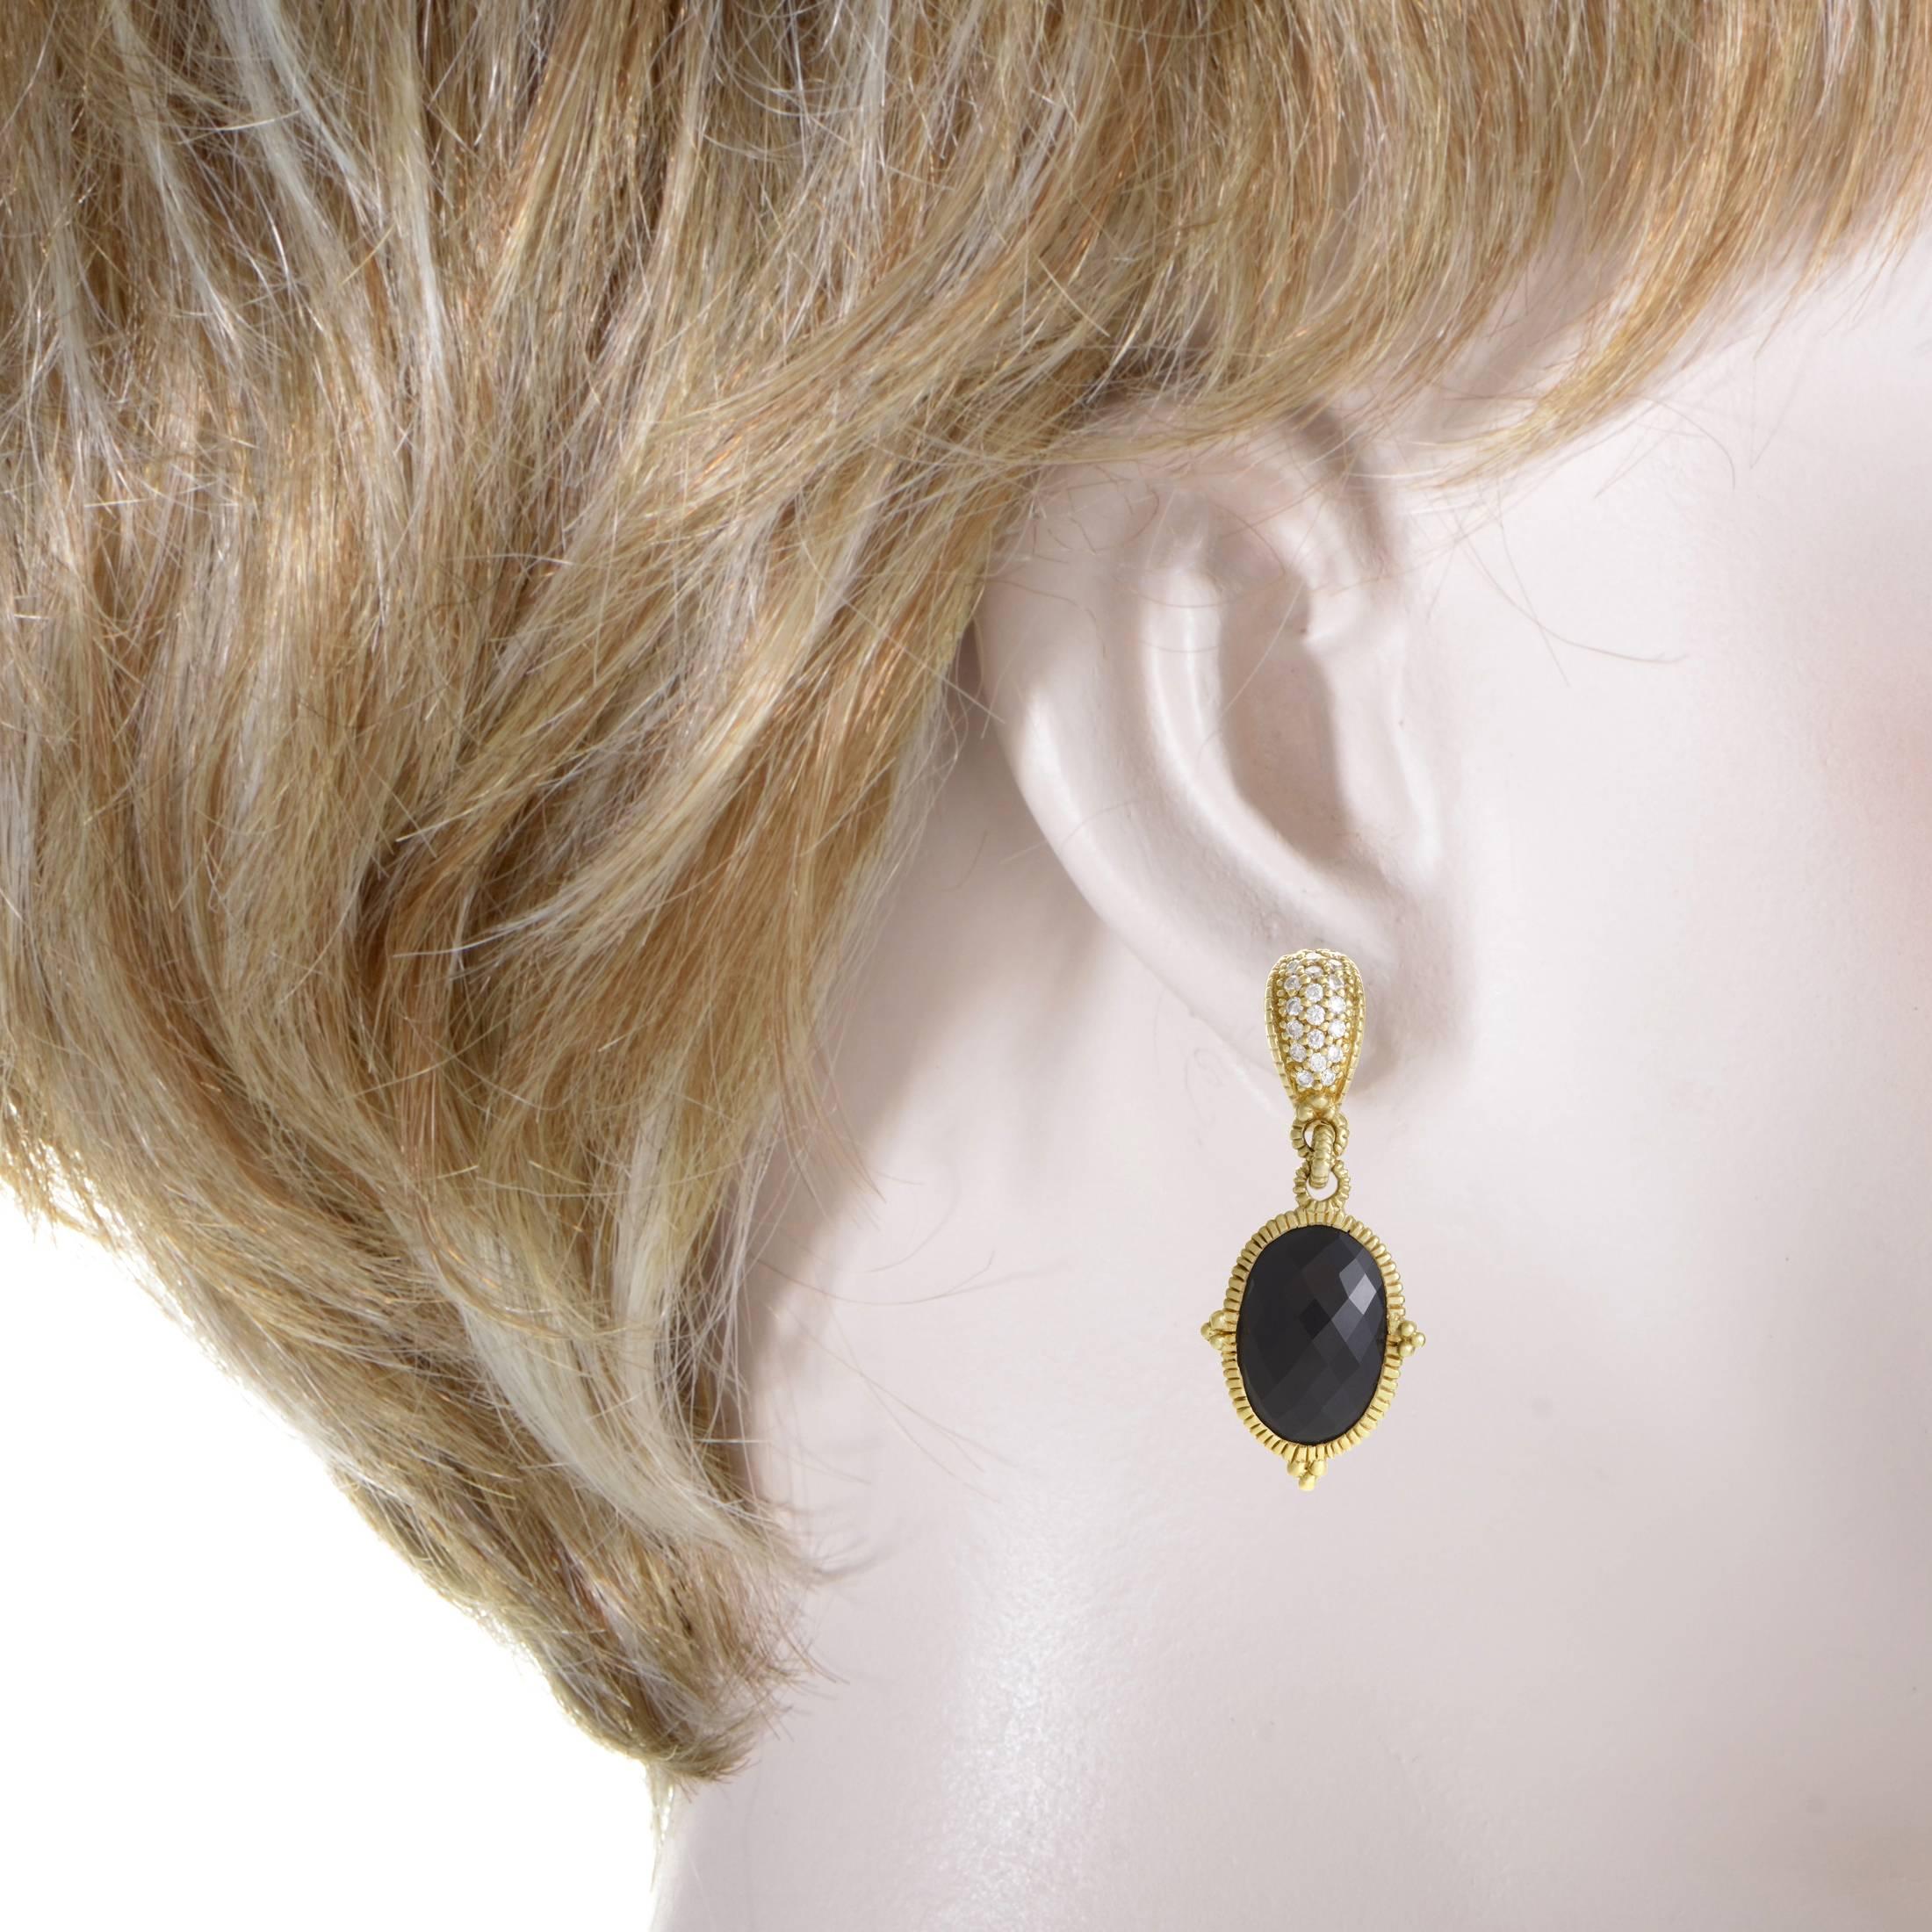 The ever-captivating combination of bright diamond stones and strikingly black onyx reaches its full potential in these majestic Judith Ripka earrings thanks to the radiant backdrop that is 18K yellow gold. The diamonds are exquisitely set at the